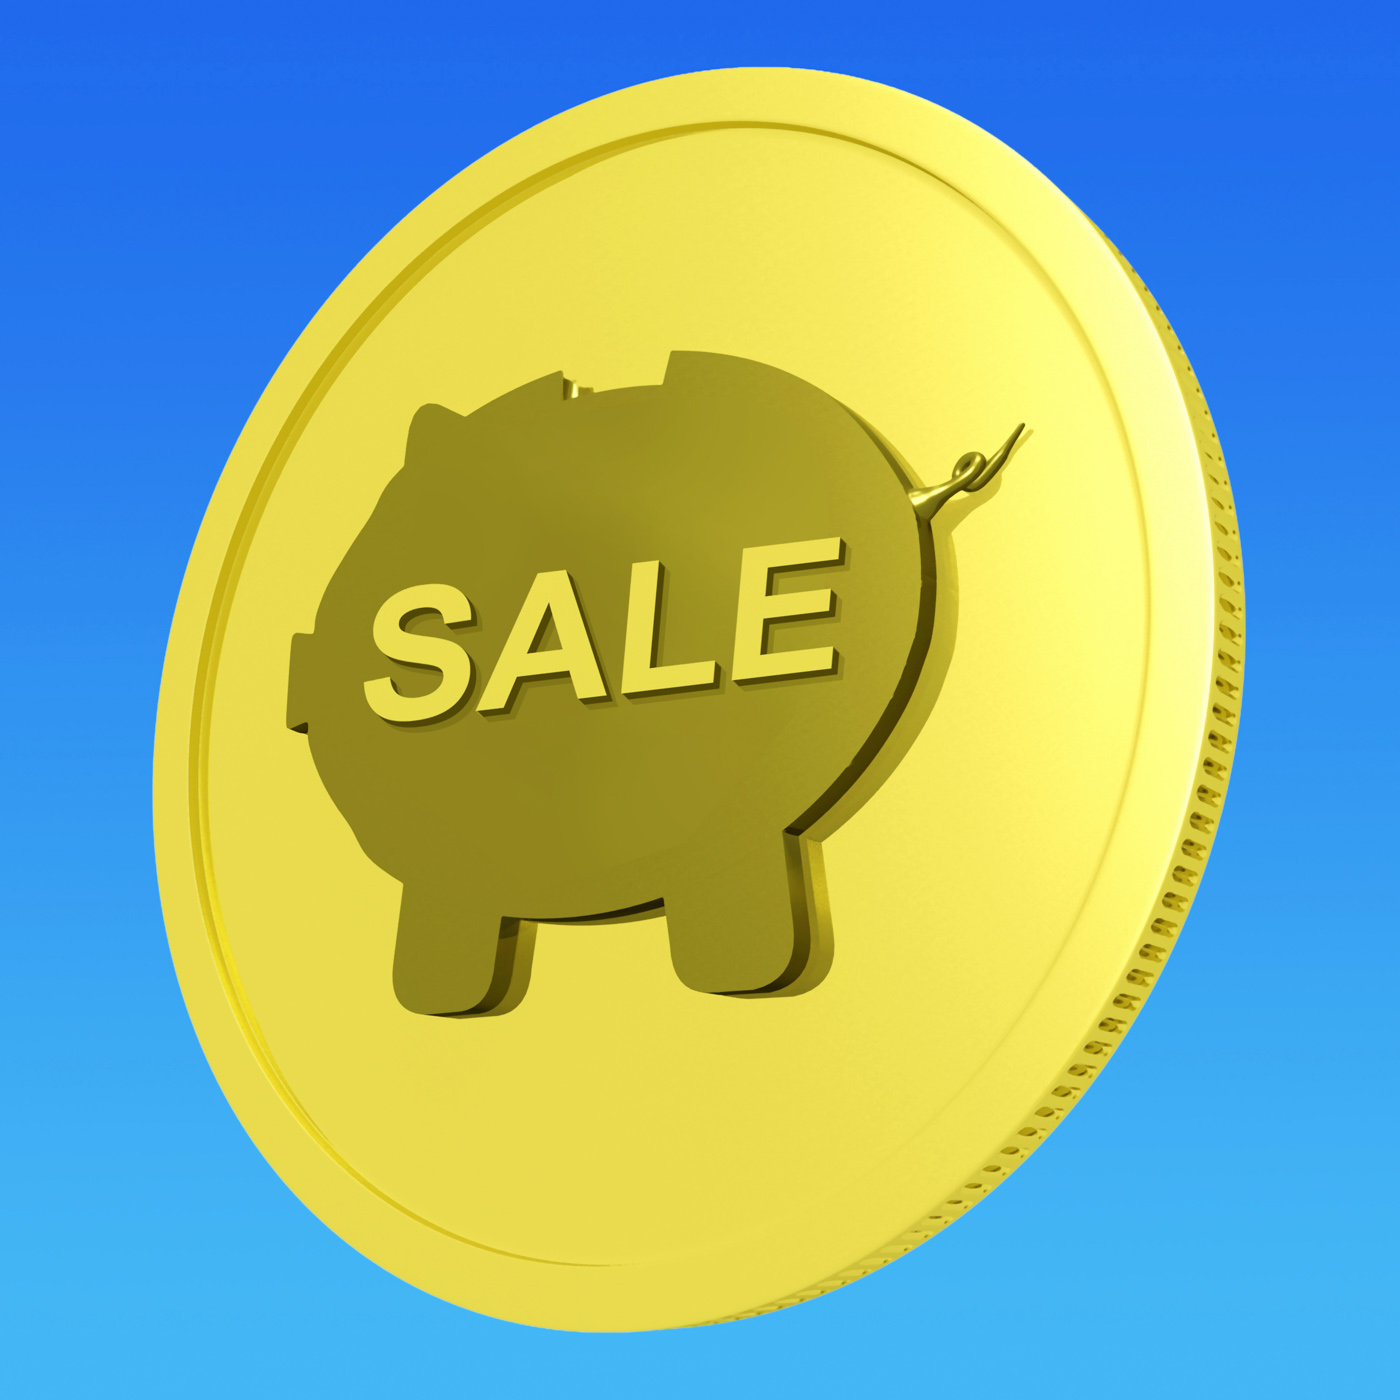 Sale Coin Means Reduced Price Or Discounted Goods, Bargain, Product, Savings, Sale, HQ Photo